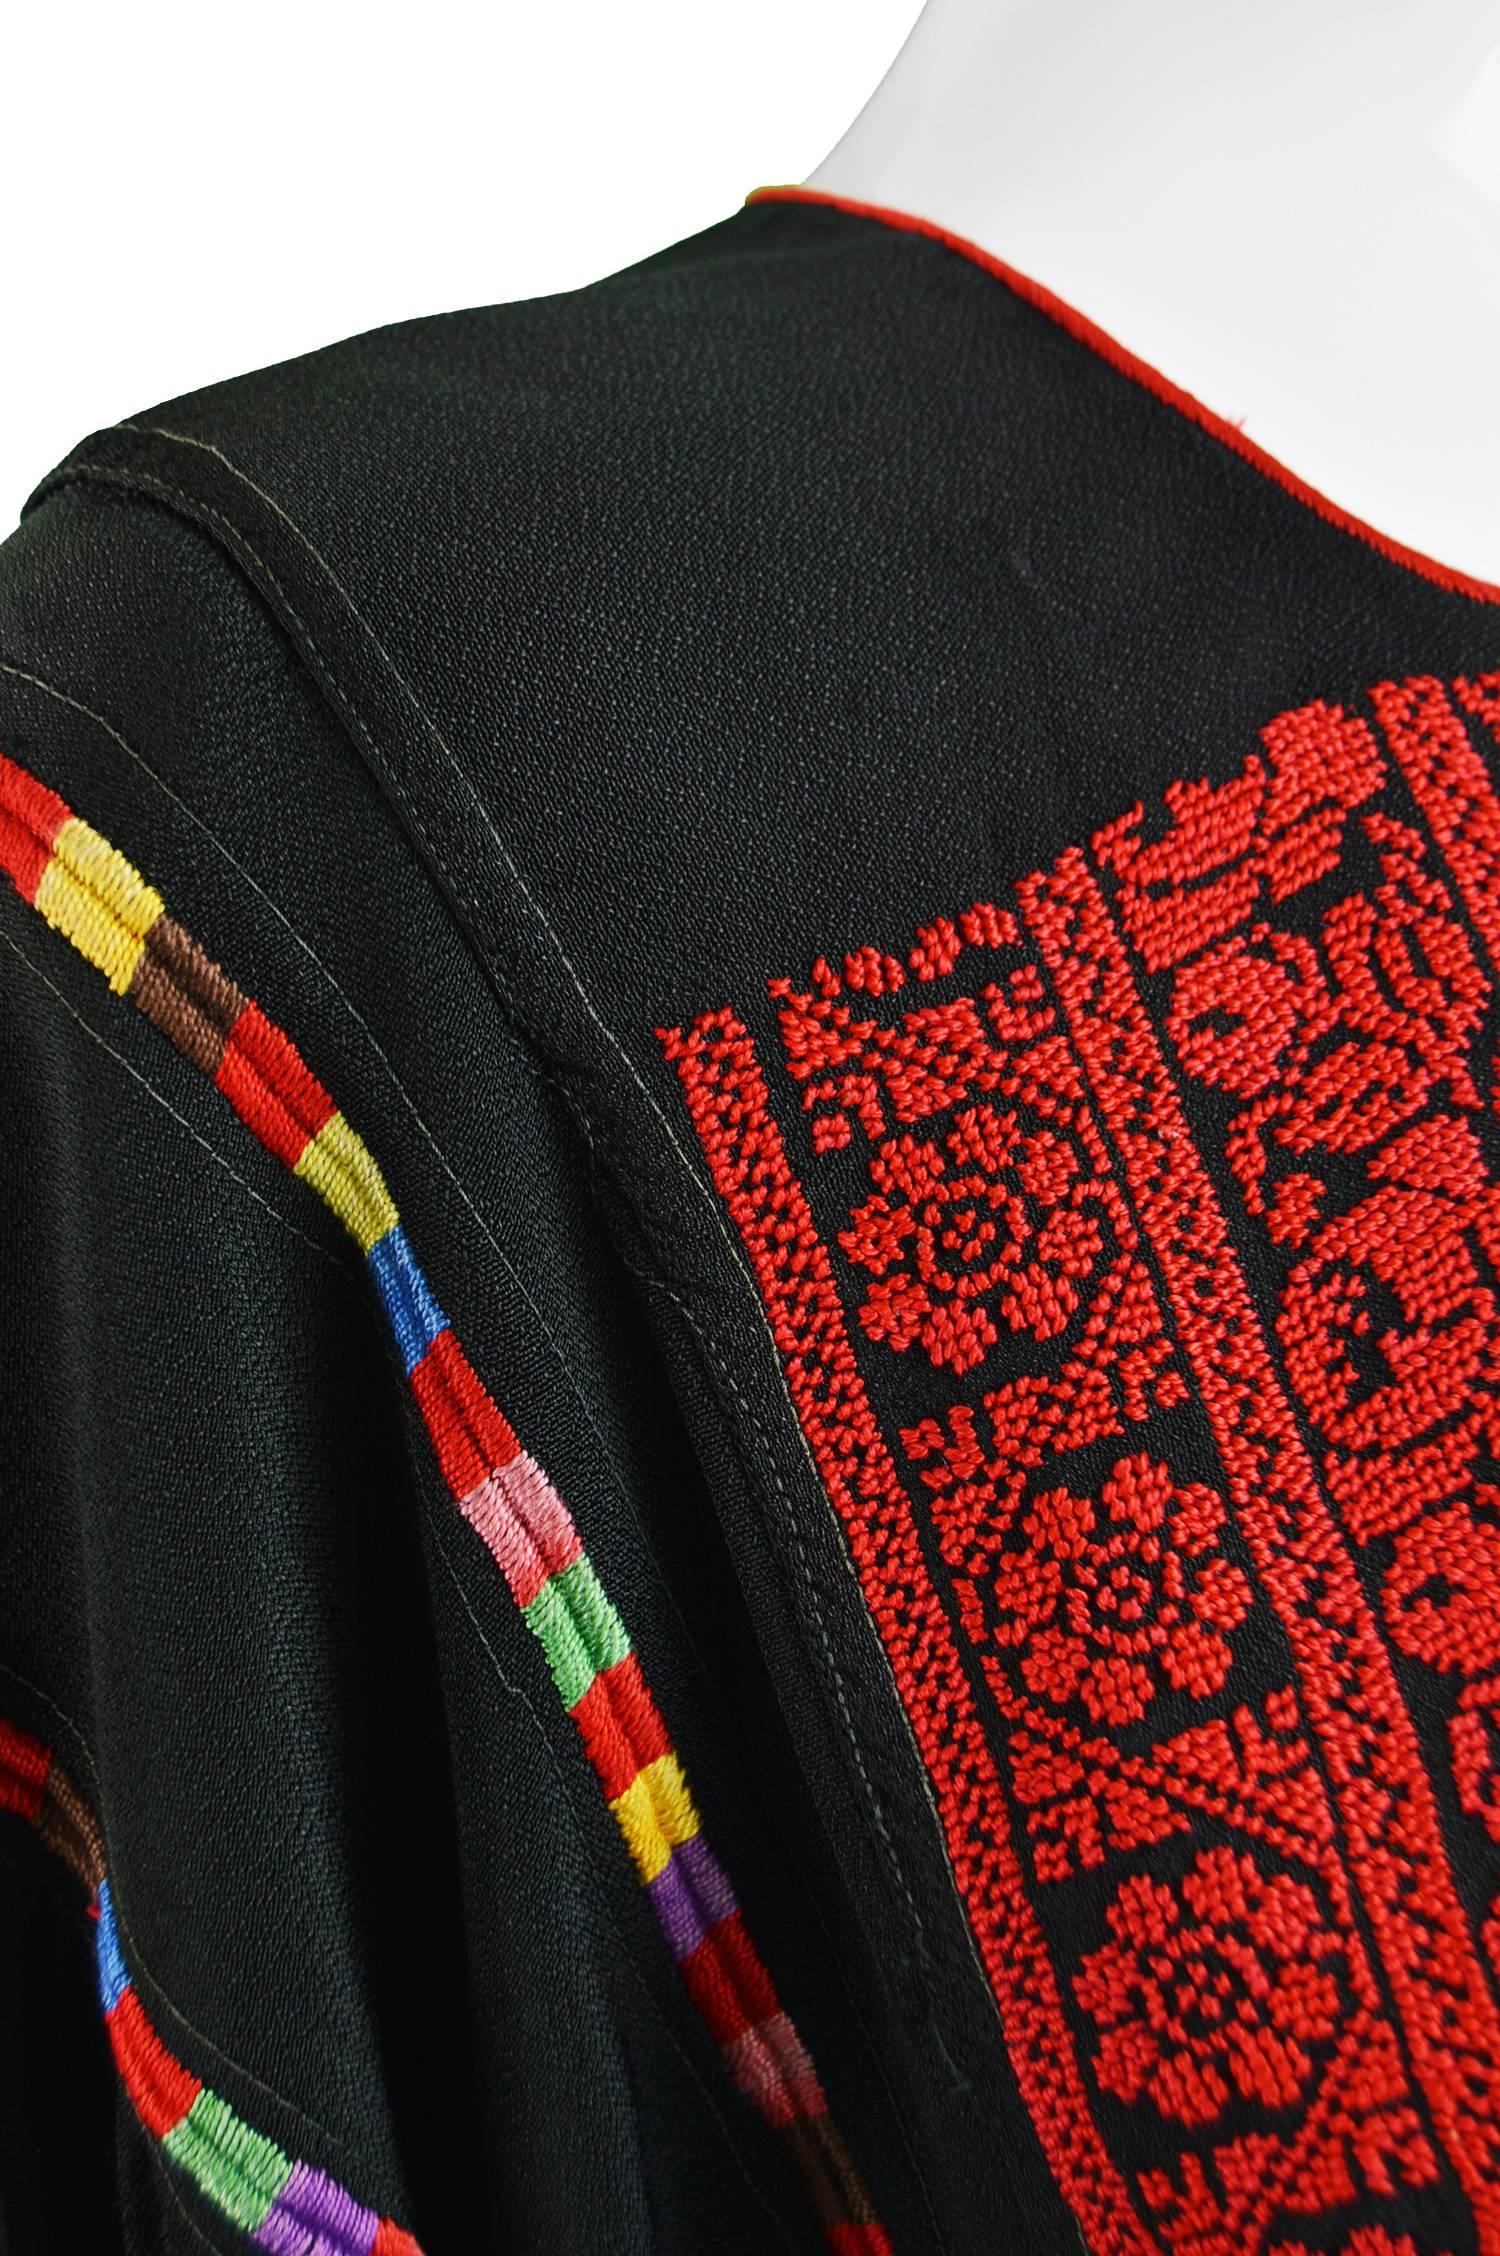 palestinian embroidery for sale